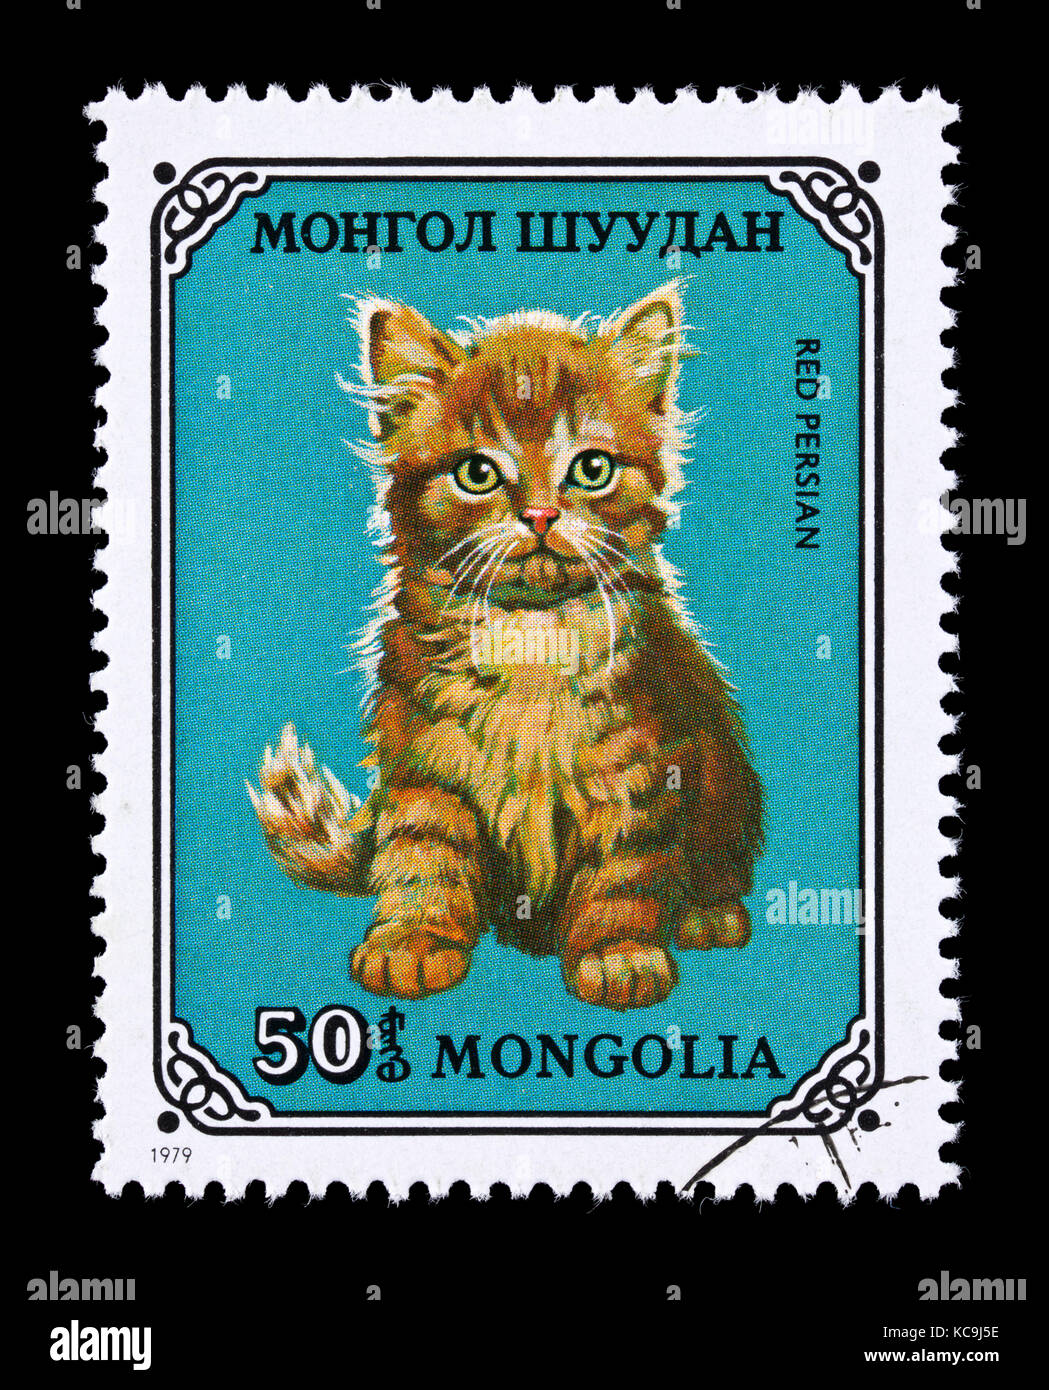 Postage stamp from Mongolia depicting a red Persian breed of housecat. Stock Photo